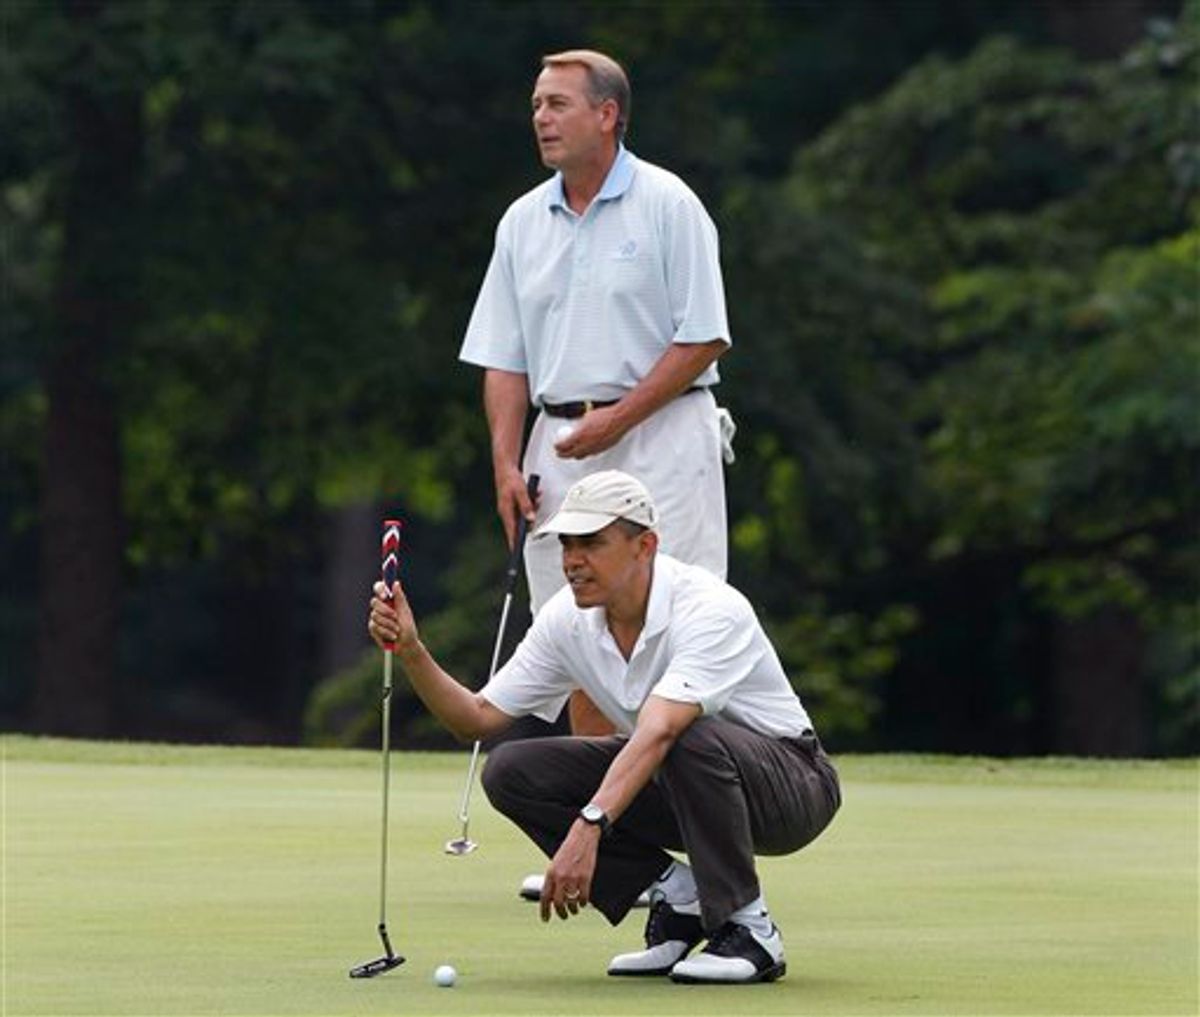 President Barack Obama and House Speaker John Boehner, R-Ohio, are on the first hole as they play golf at Andrews Air Force Base, Md.,  Saturday, June 18, 2011. (AP Photo/Charles Dharapak) (AP)